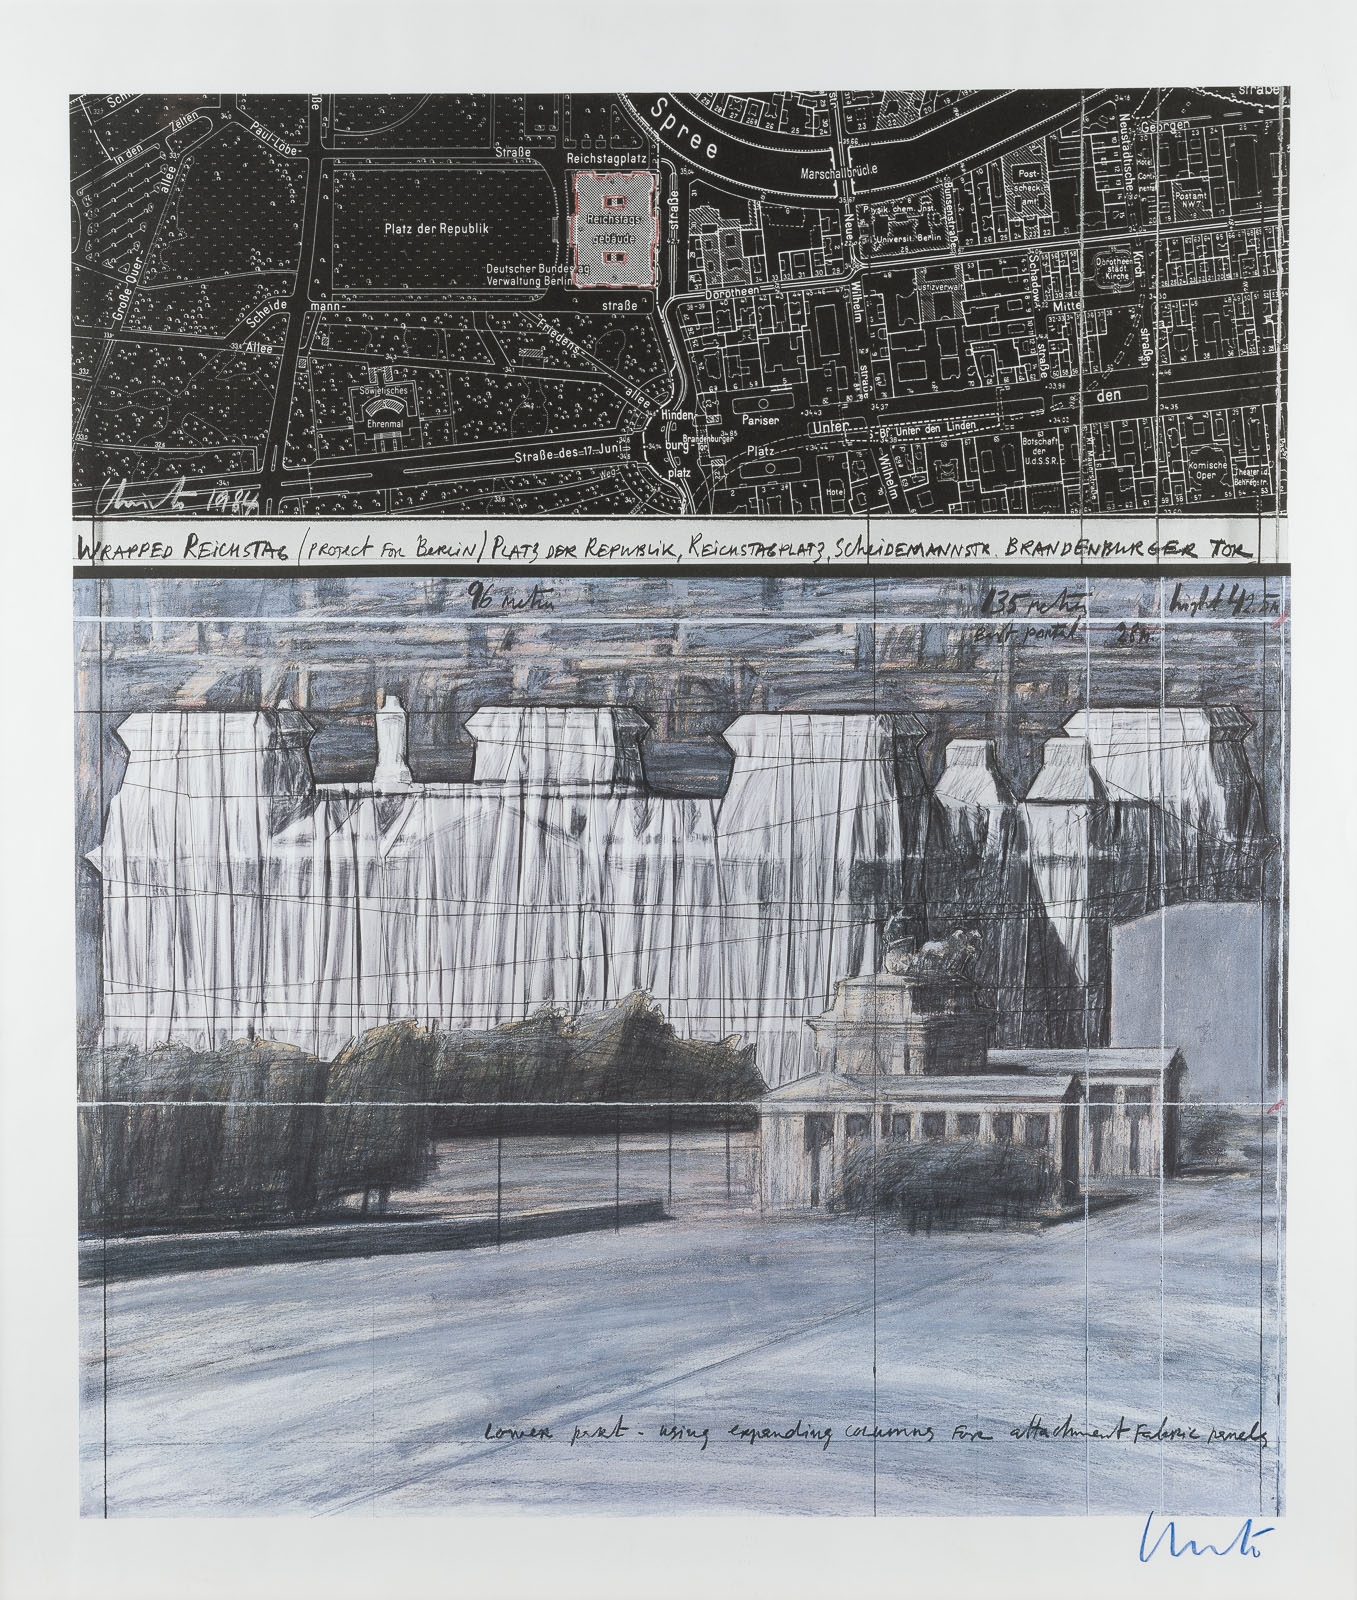 CHRISTO & JEANNE-CLAUDE 'WRAPPED REICHSTAG'